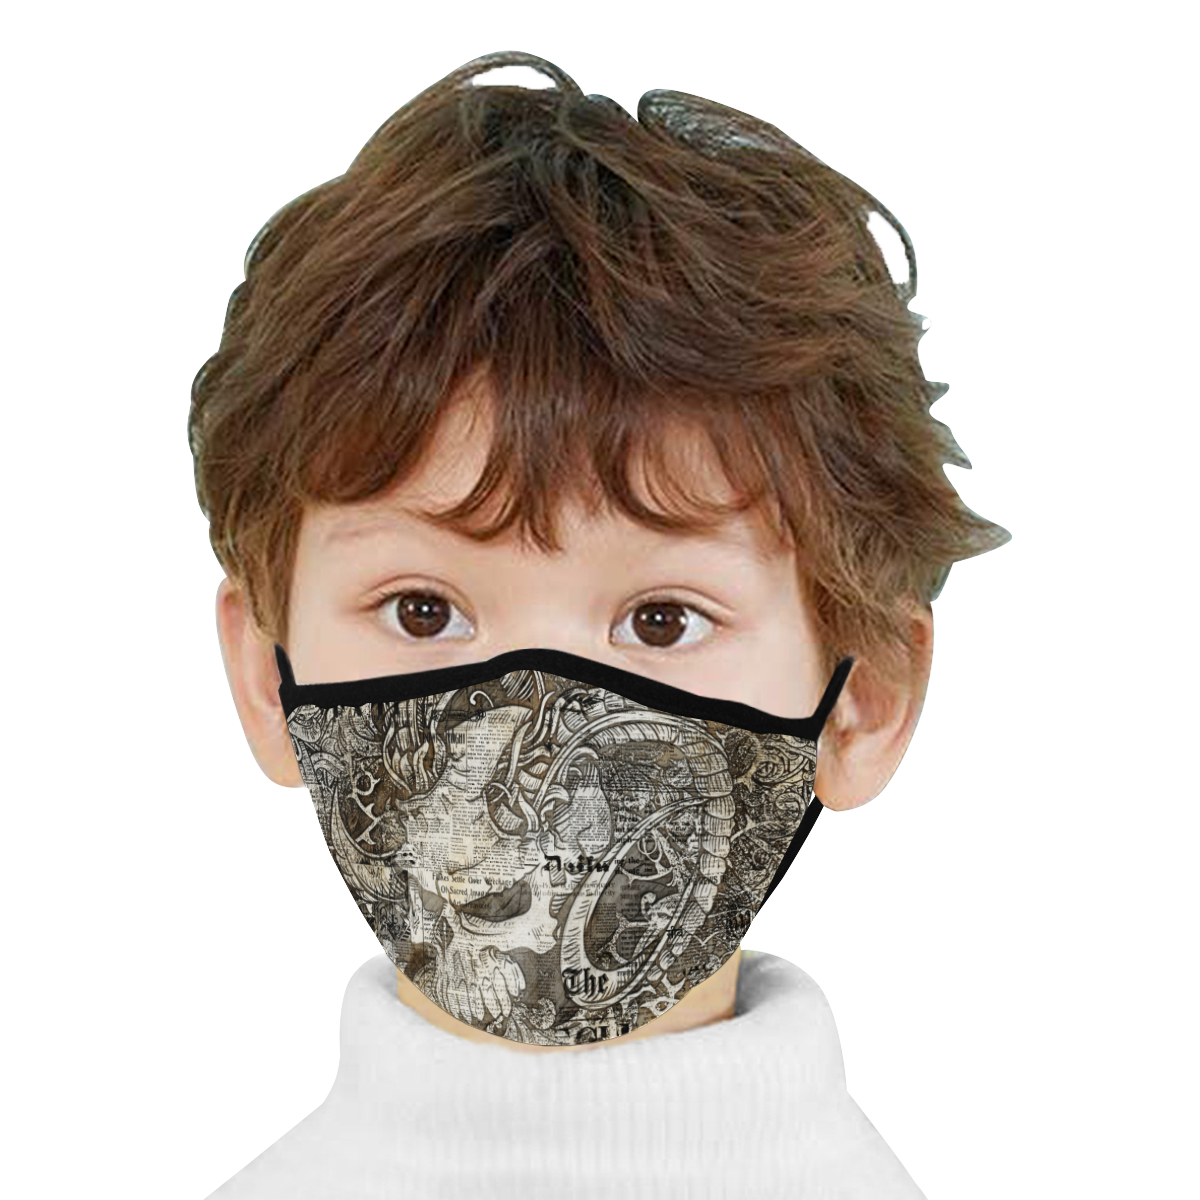 Abstract journal skull Mouth Mask